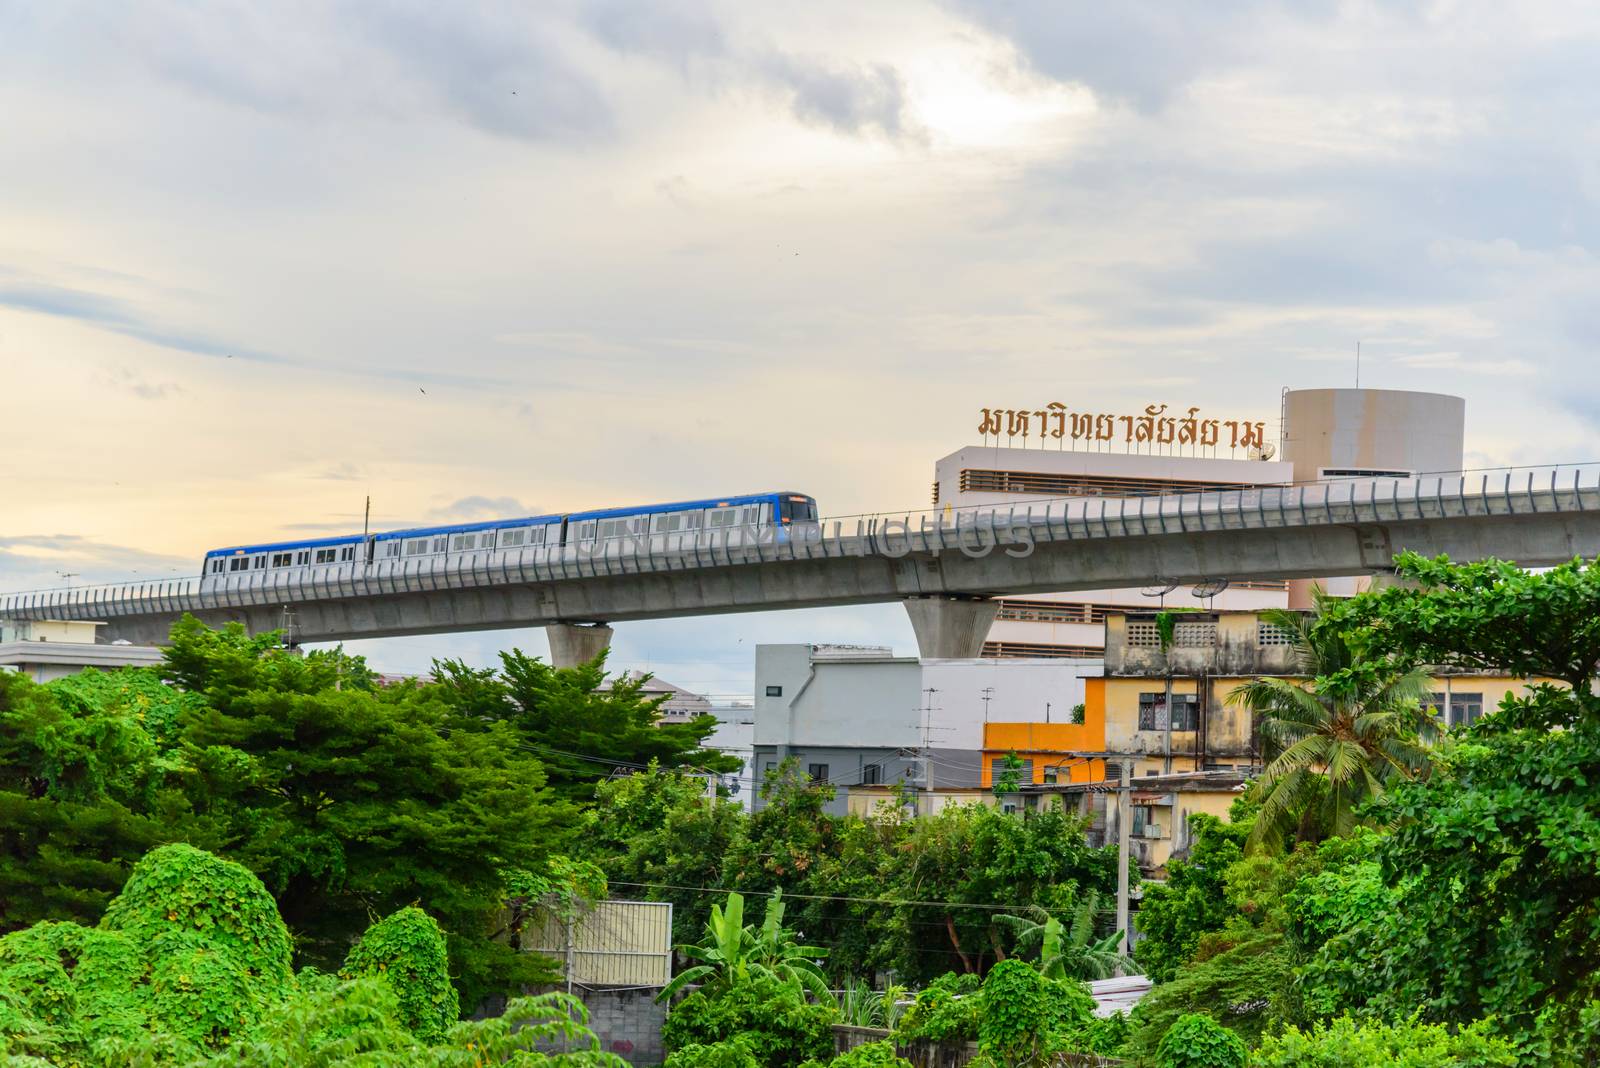 MRT electric skytrain with Label of Siam University in sunset time by rukawajung